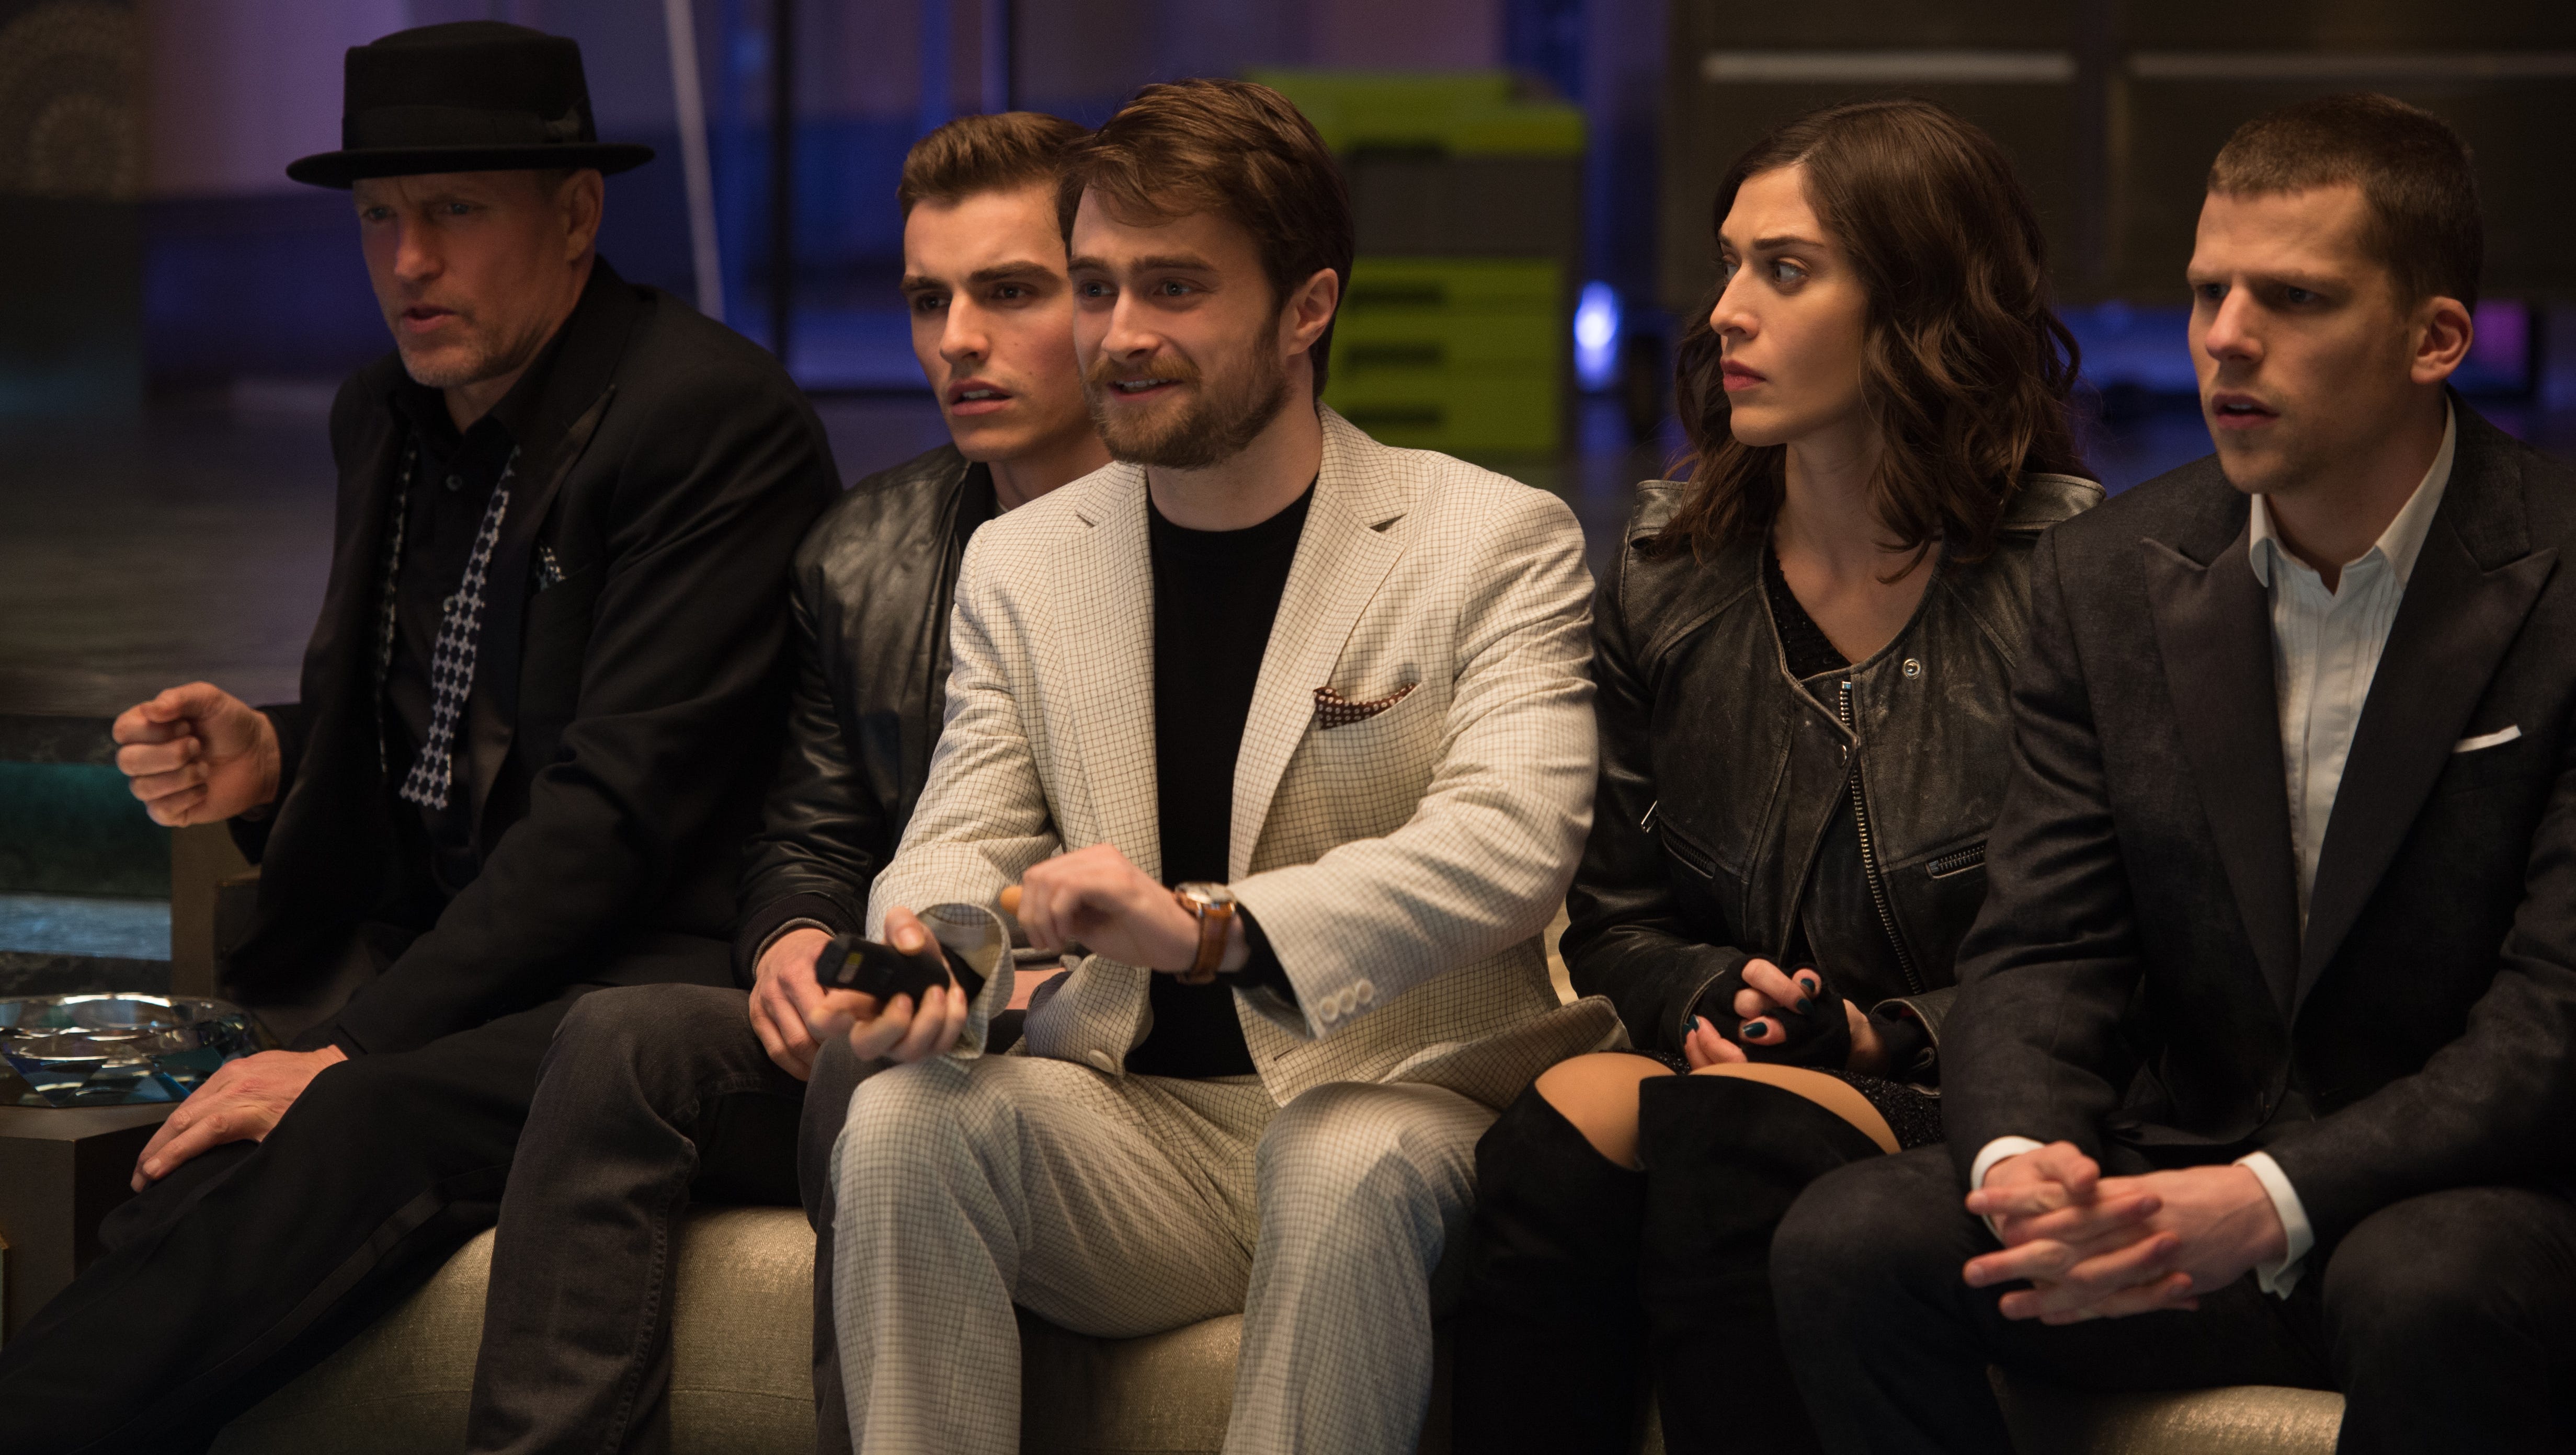 Daniel Radcliffe disappears into 'Now You See Me' role